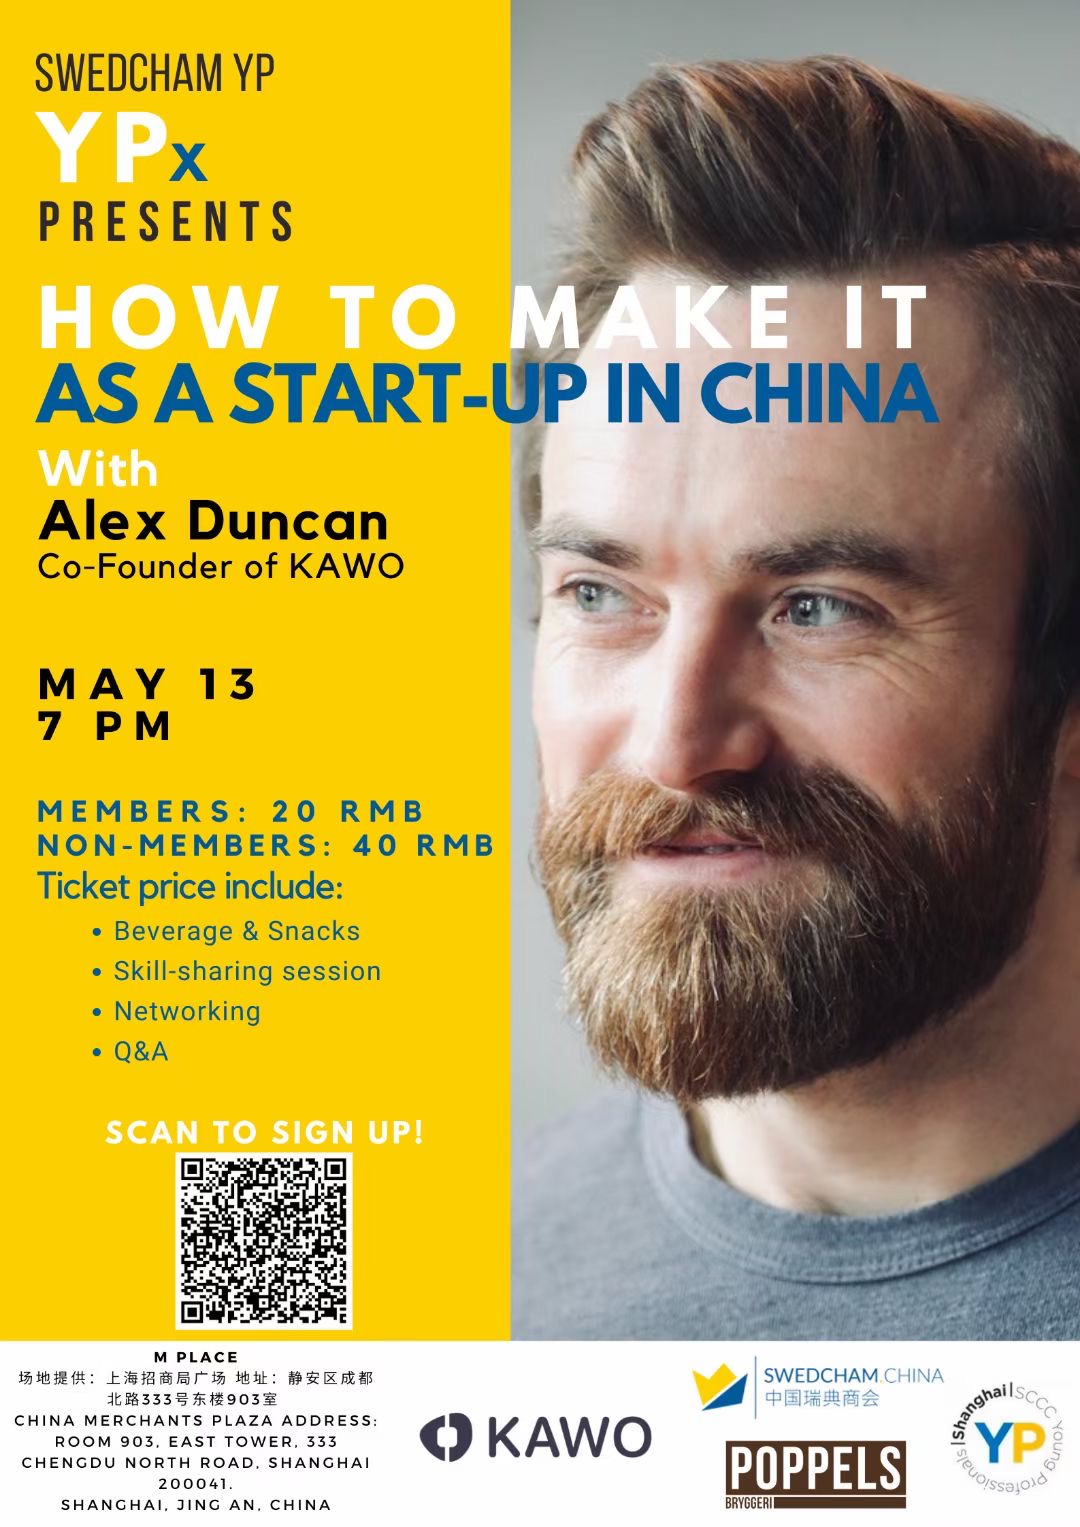 SH: YPX EP 4 - HOW TO MAKE IT AS A START-UP IN CHINA | Shanghai Events